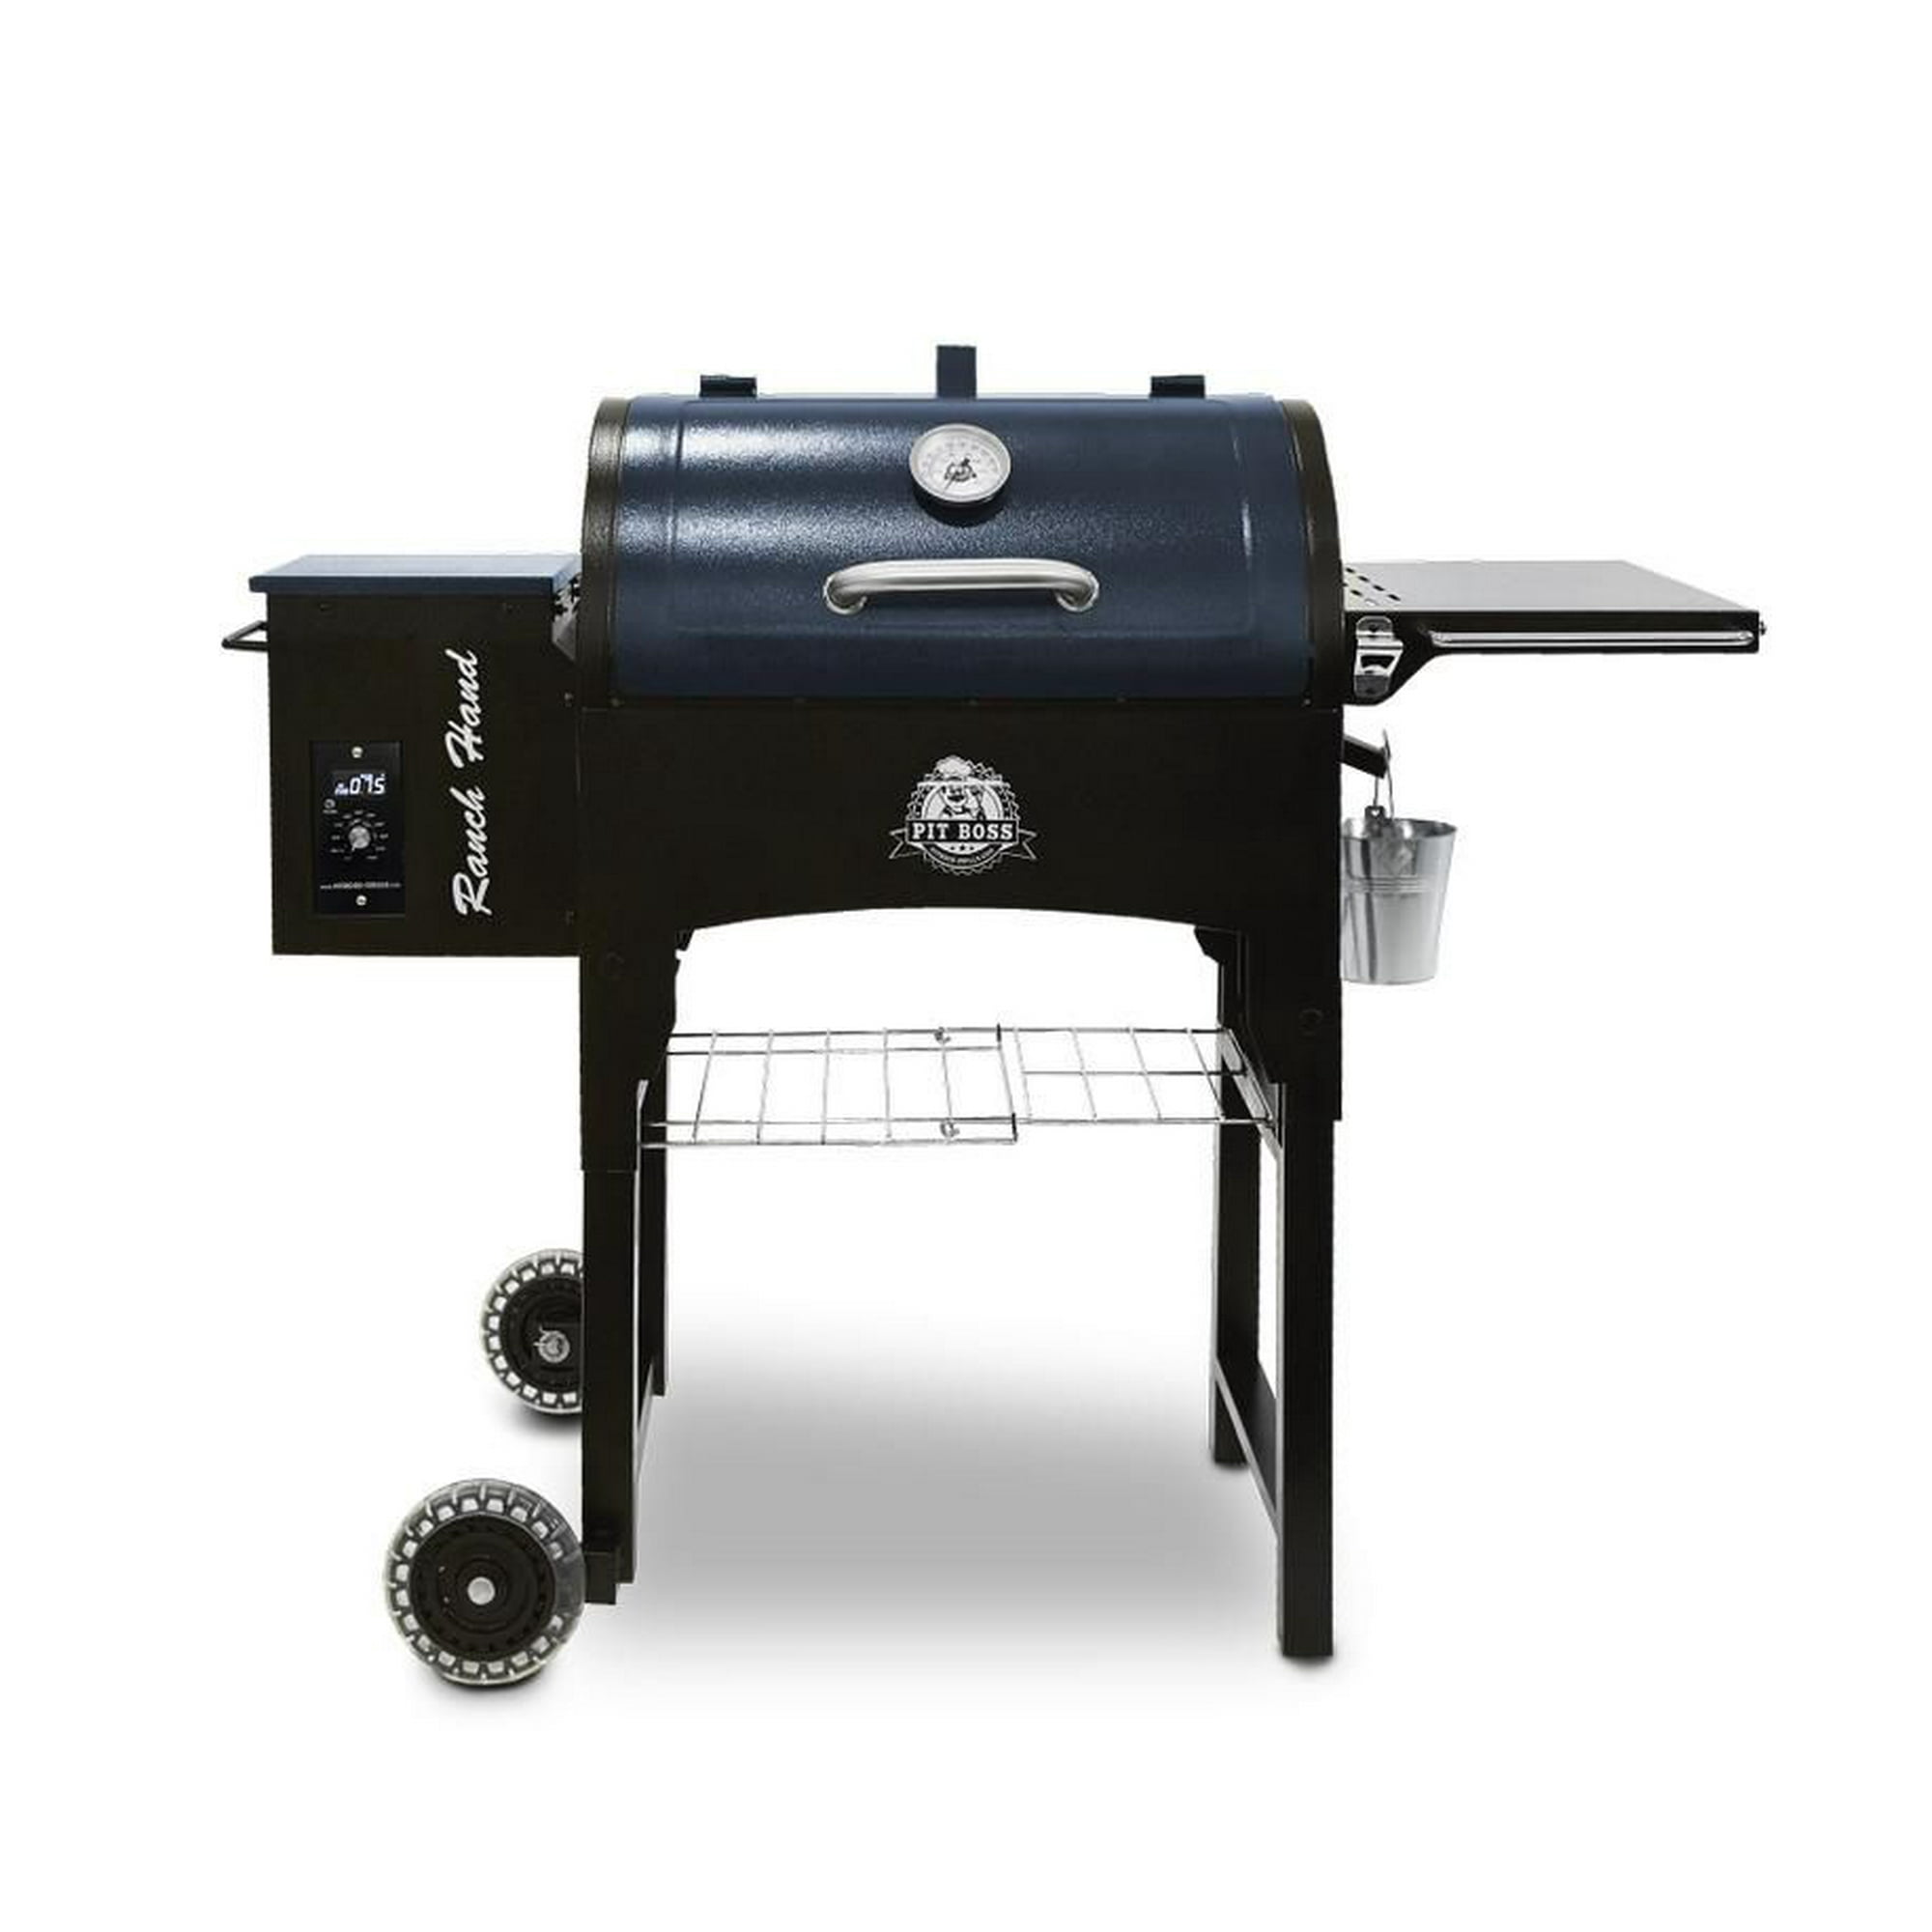 Pit Boss Portable Ranch Hand Wood Pellet Grill, 440 Sq. In